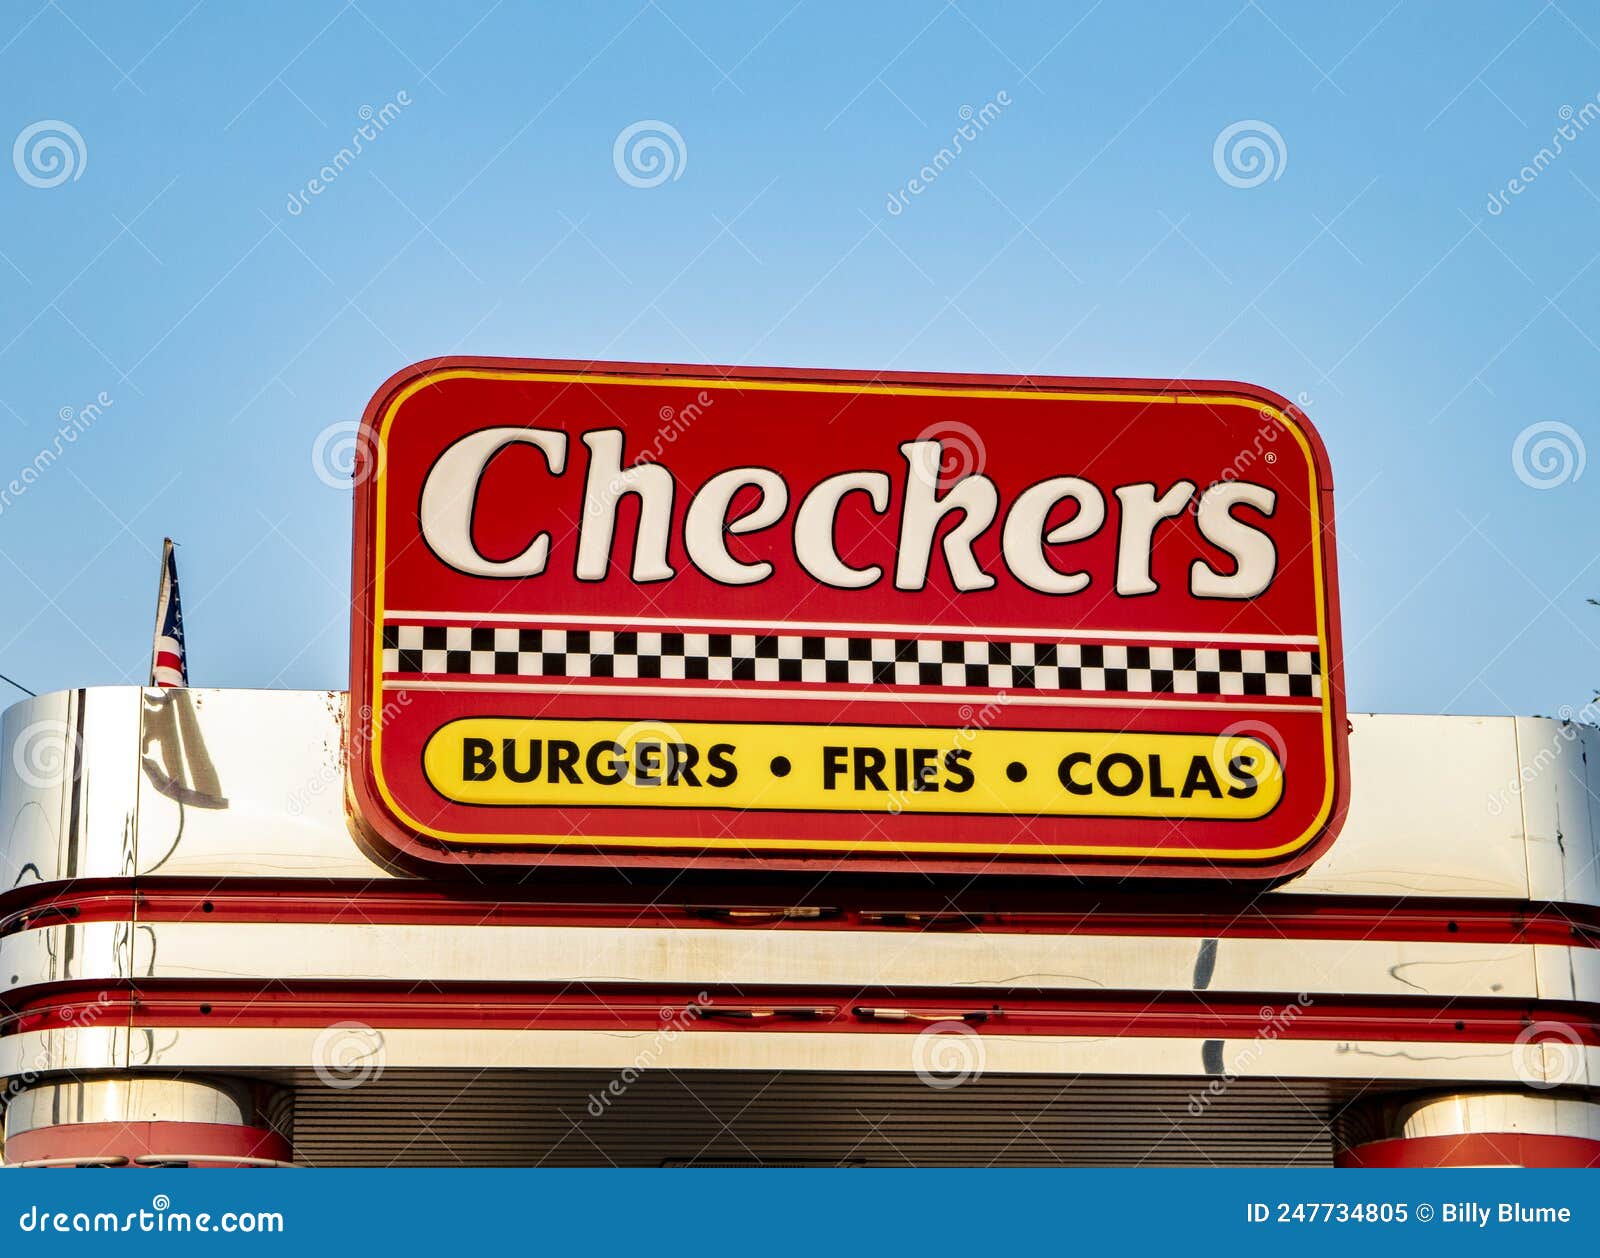 Checkers Fast Food Building Sign Editorial Image - Image of brand ...